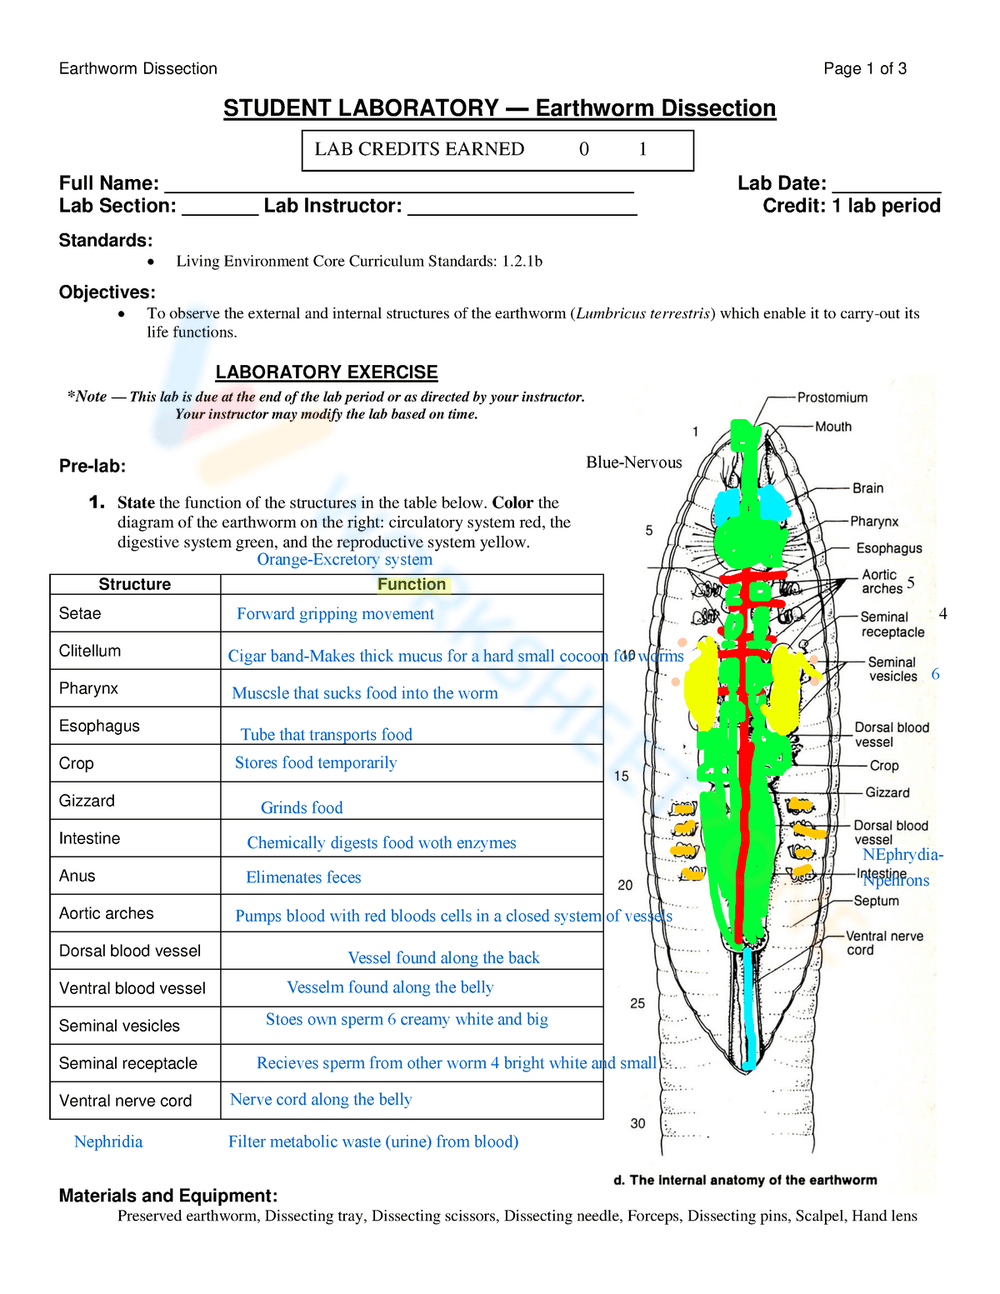 STUDENT LABORATORY-Earthworm Dissection Worksheet